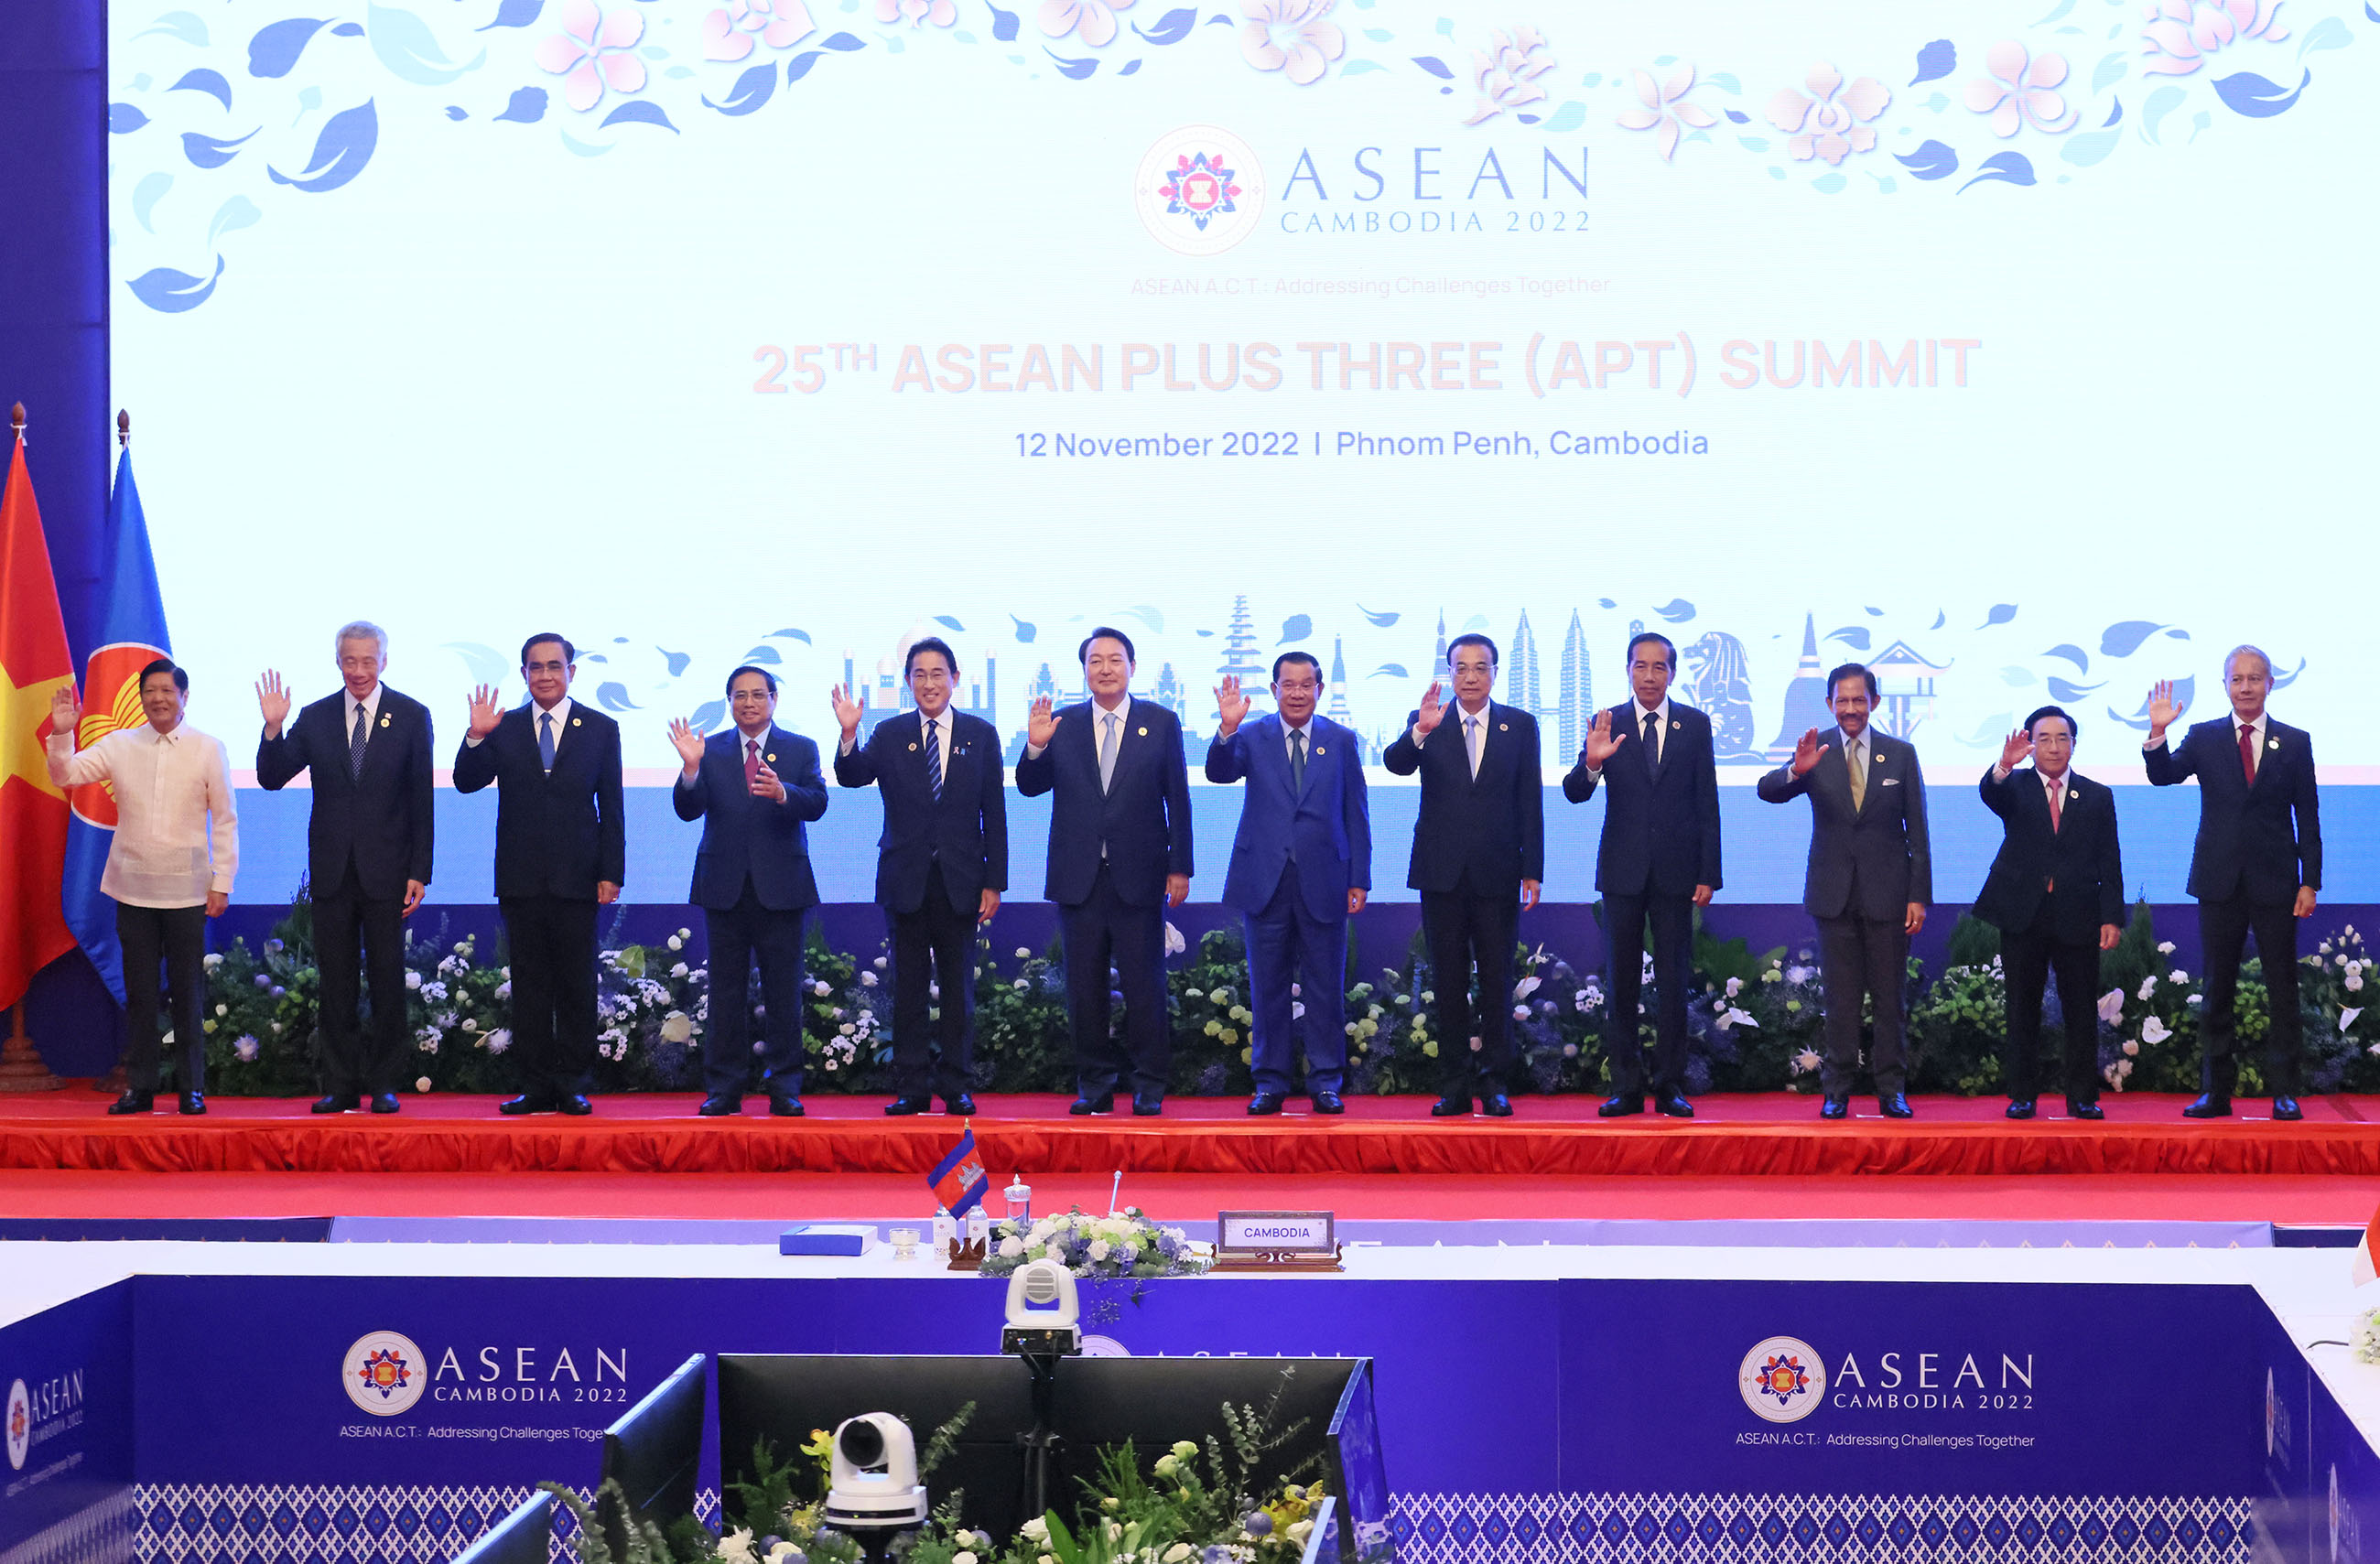 Photograph of the Prime Minister at a photograph session with ASEAN Plus Three leaders (1)